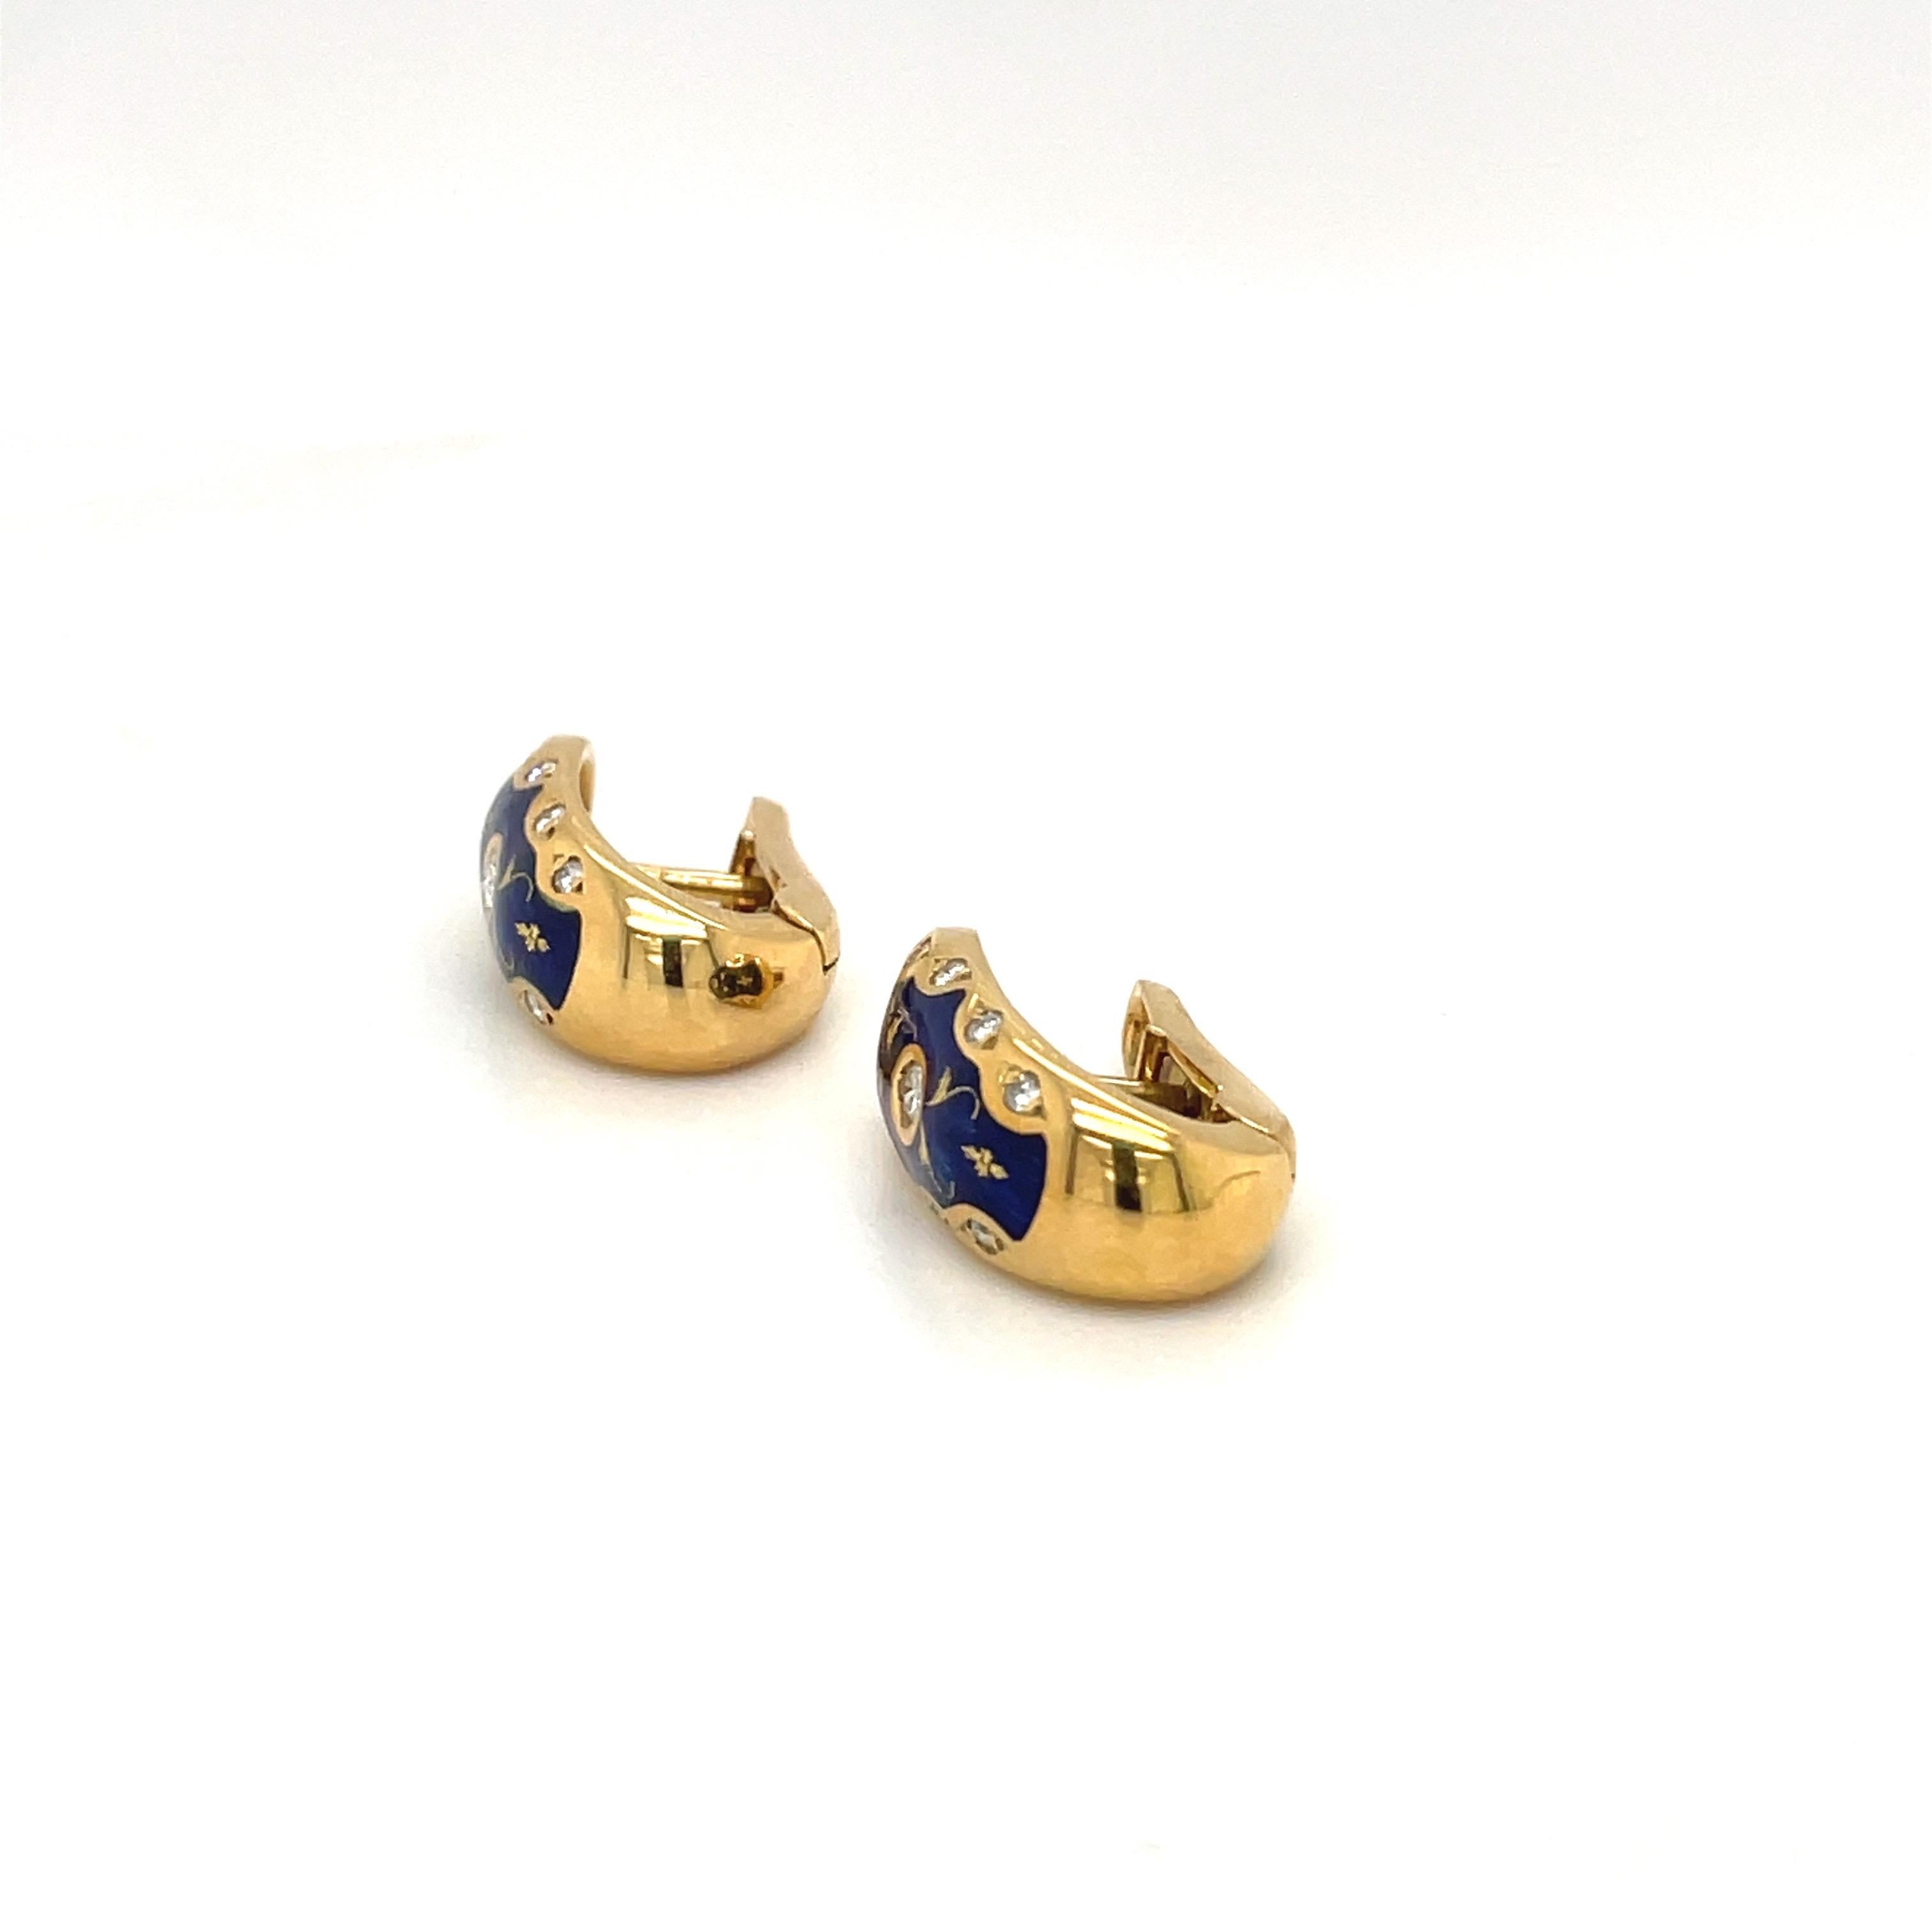 Faberge 18kt Yellow Gold Diamond 0.24cts. & Blue Enamel Huggy Earrings #51/300 In New Condition For Sale In New York, NY